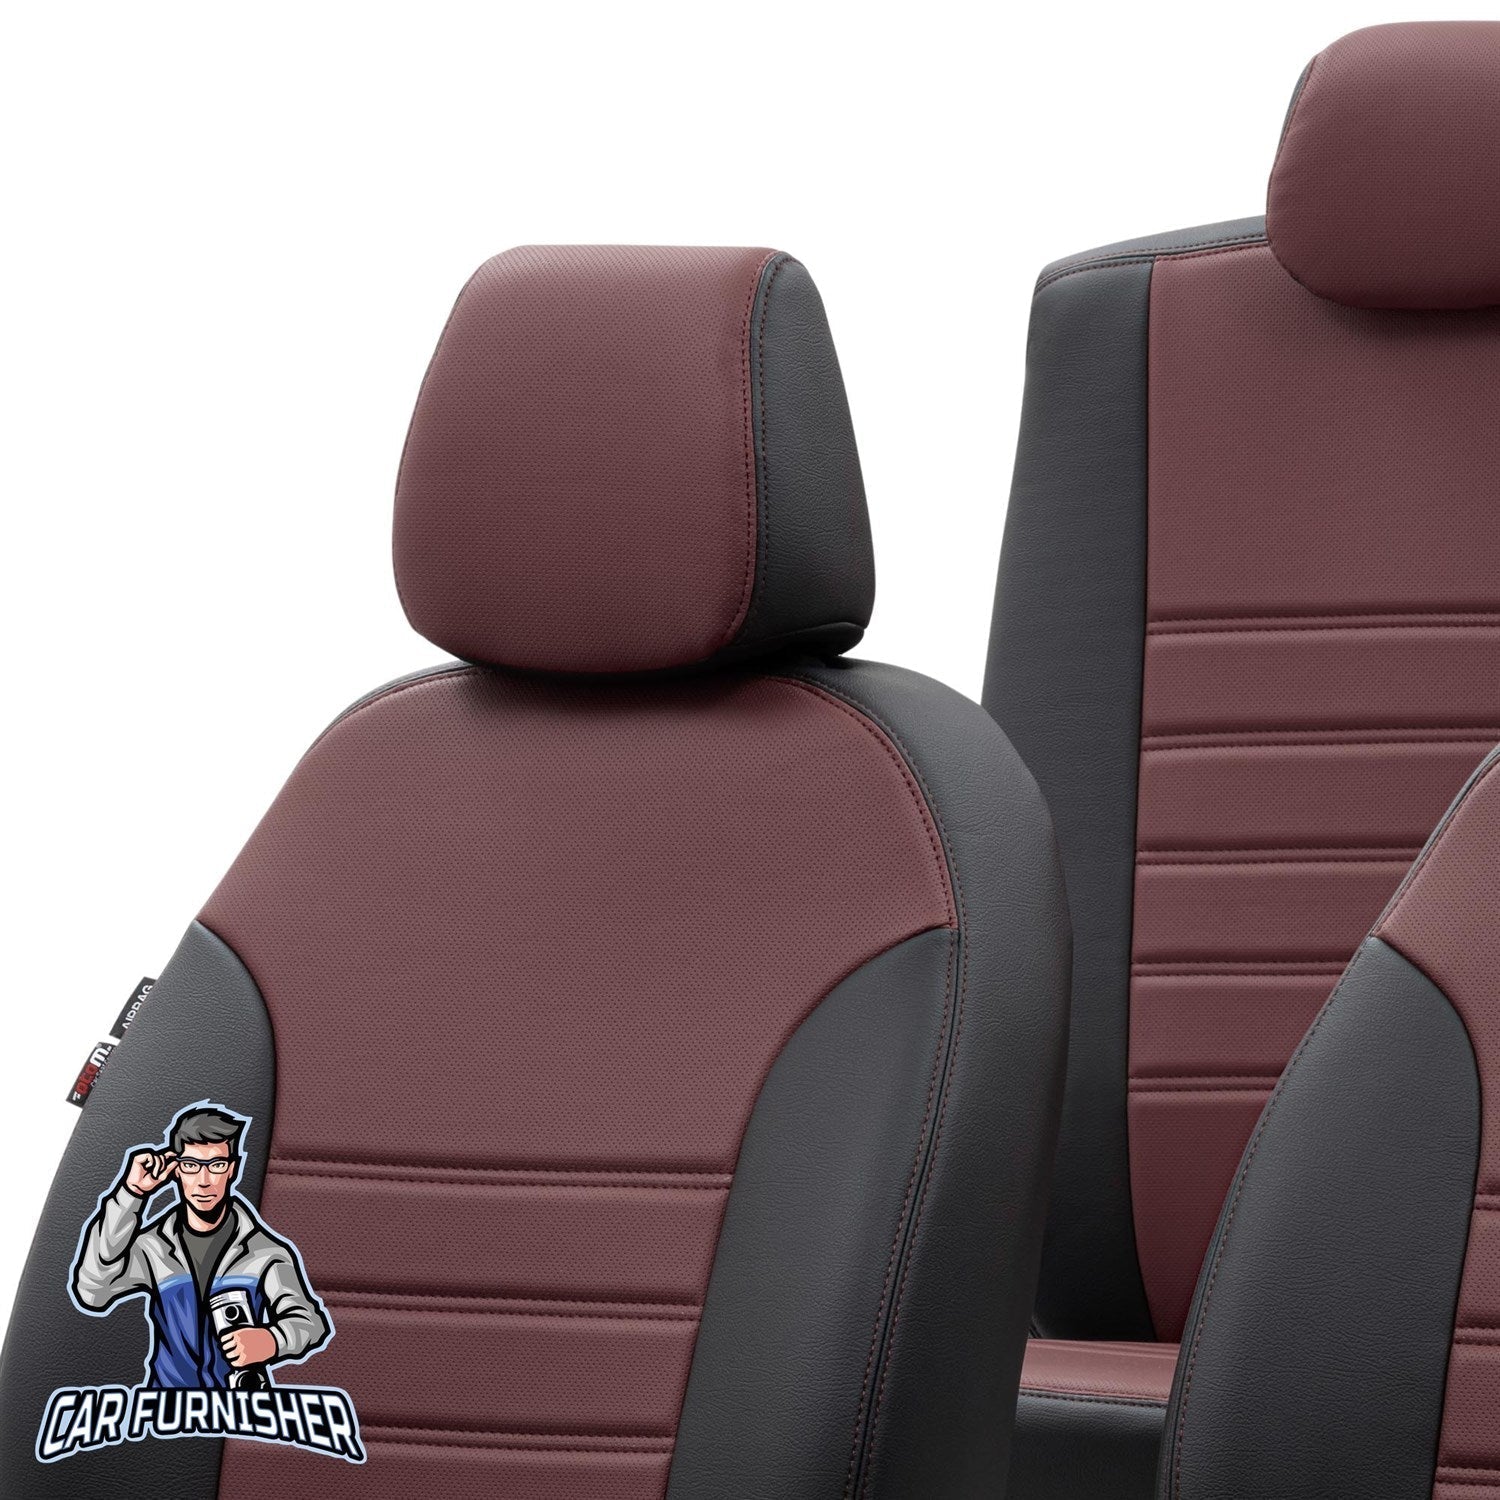 Renault Premium Seat Cover Istanbul Leather Design Burgundy Front Seats (2 Seats + Handrest + Headrests) Leather